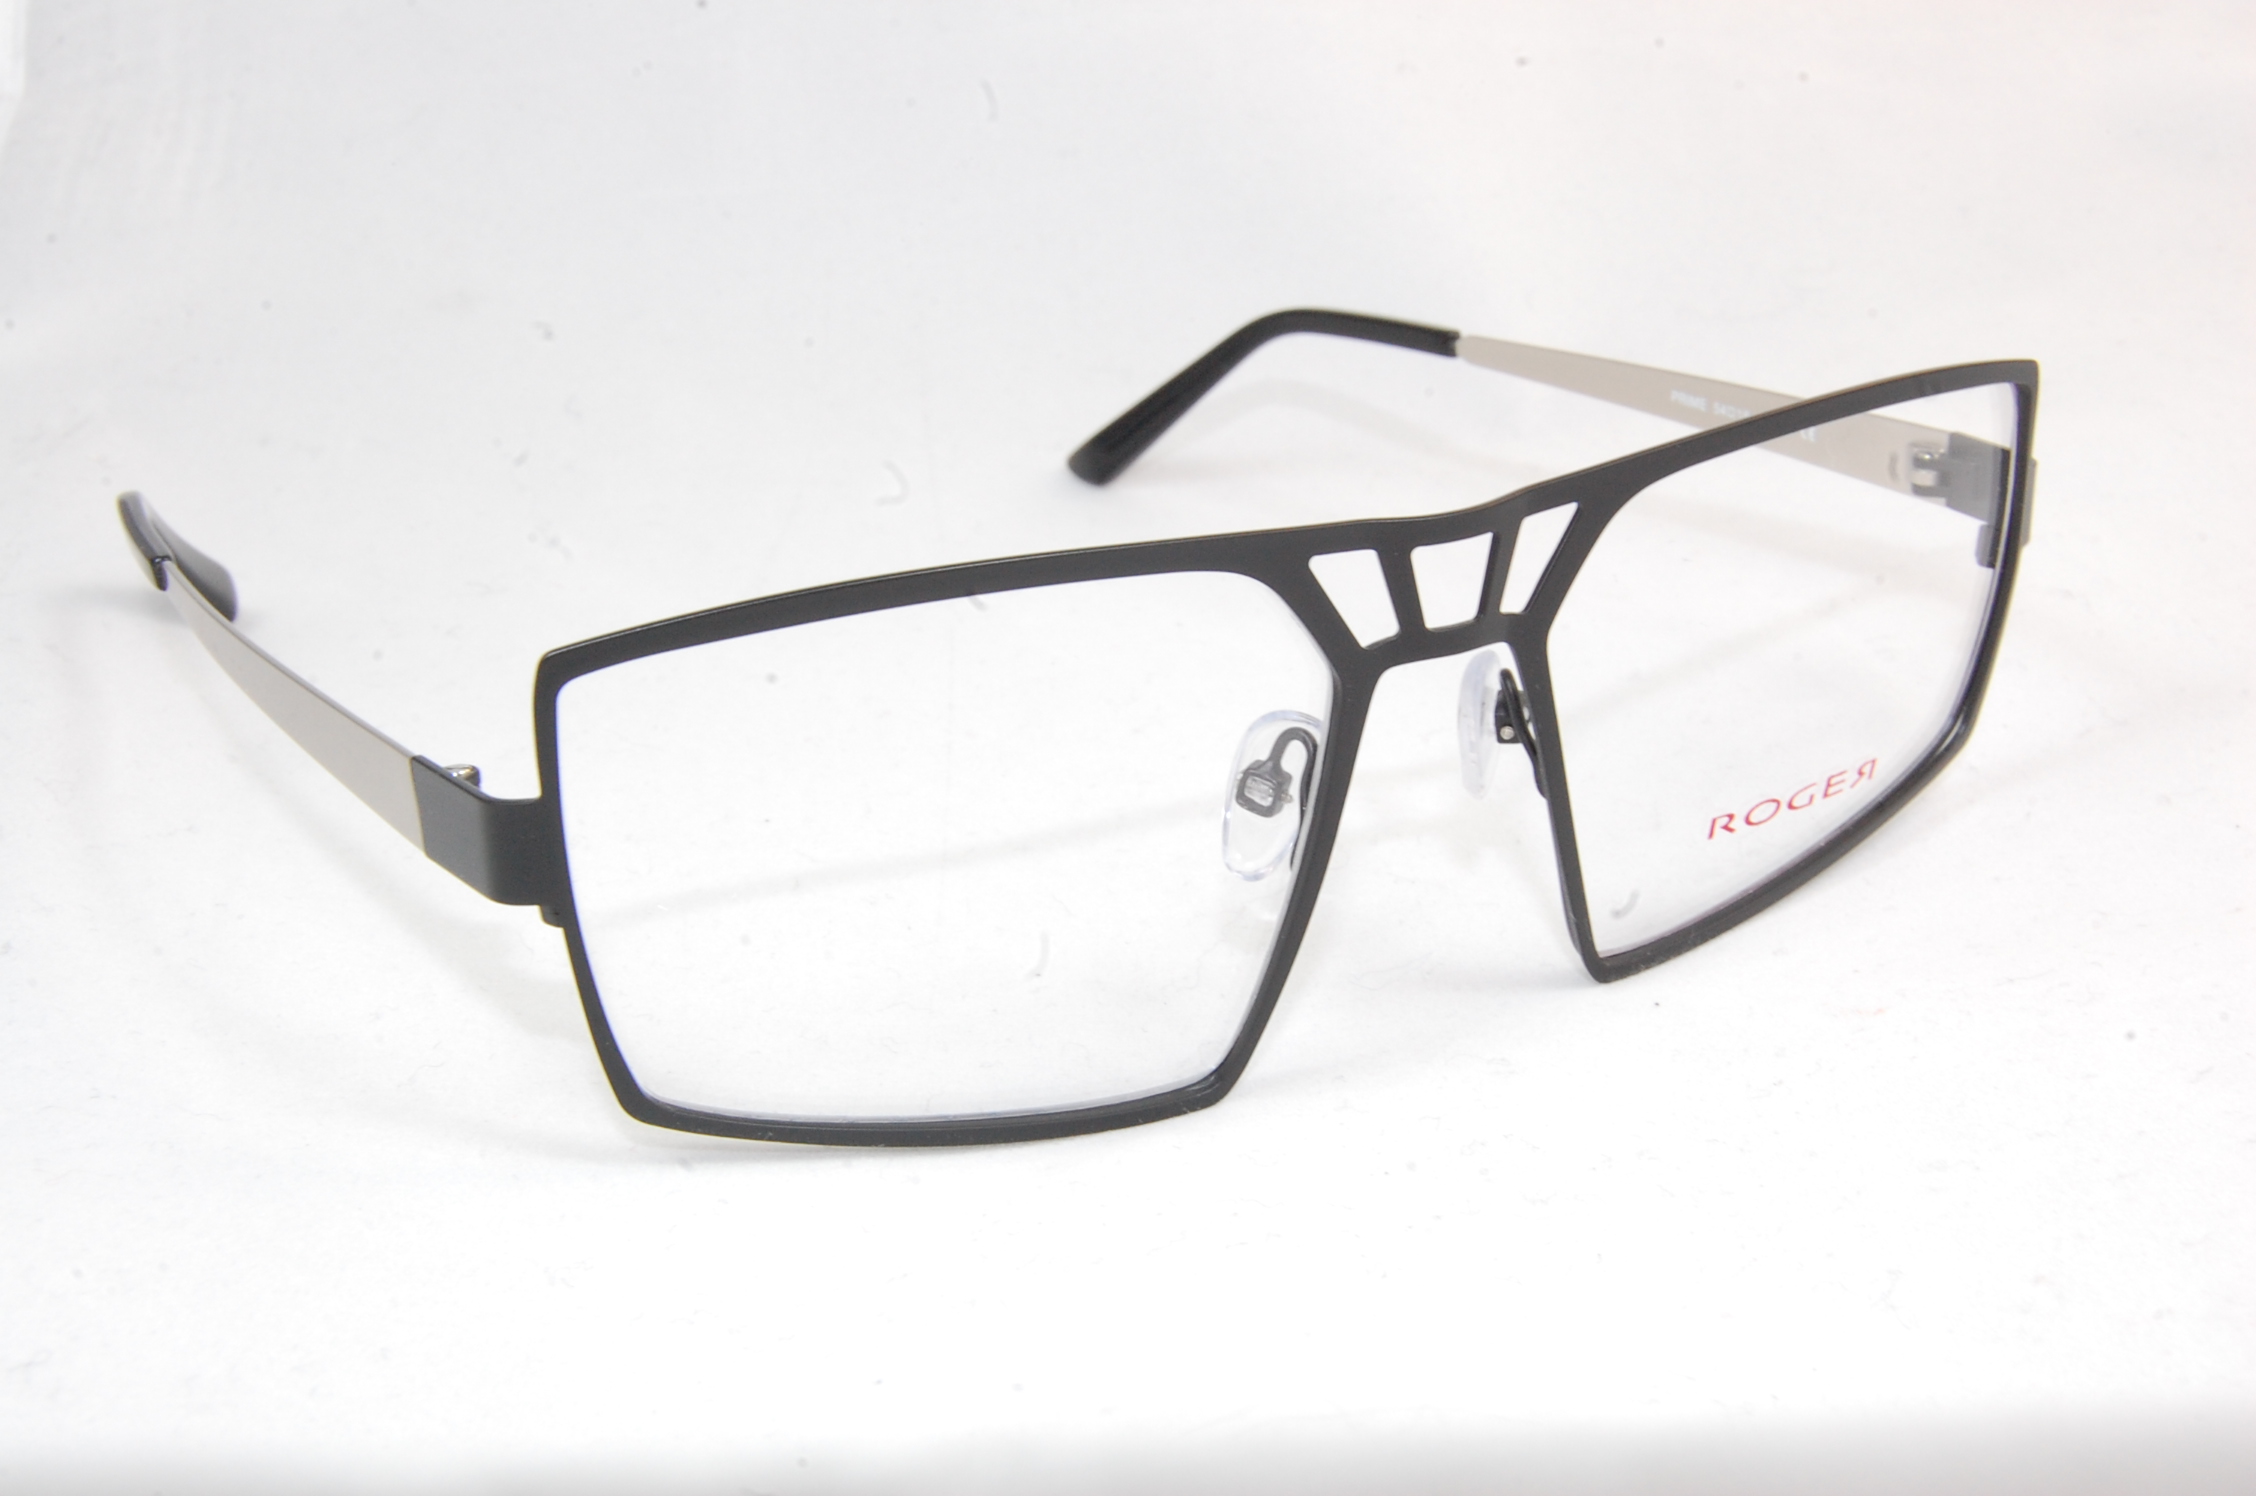 ROGER-OPTIQUE10/10-FACHES THUMESNIL